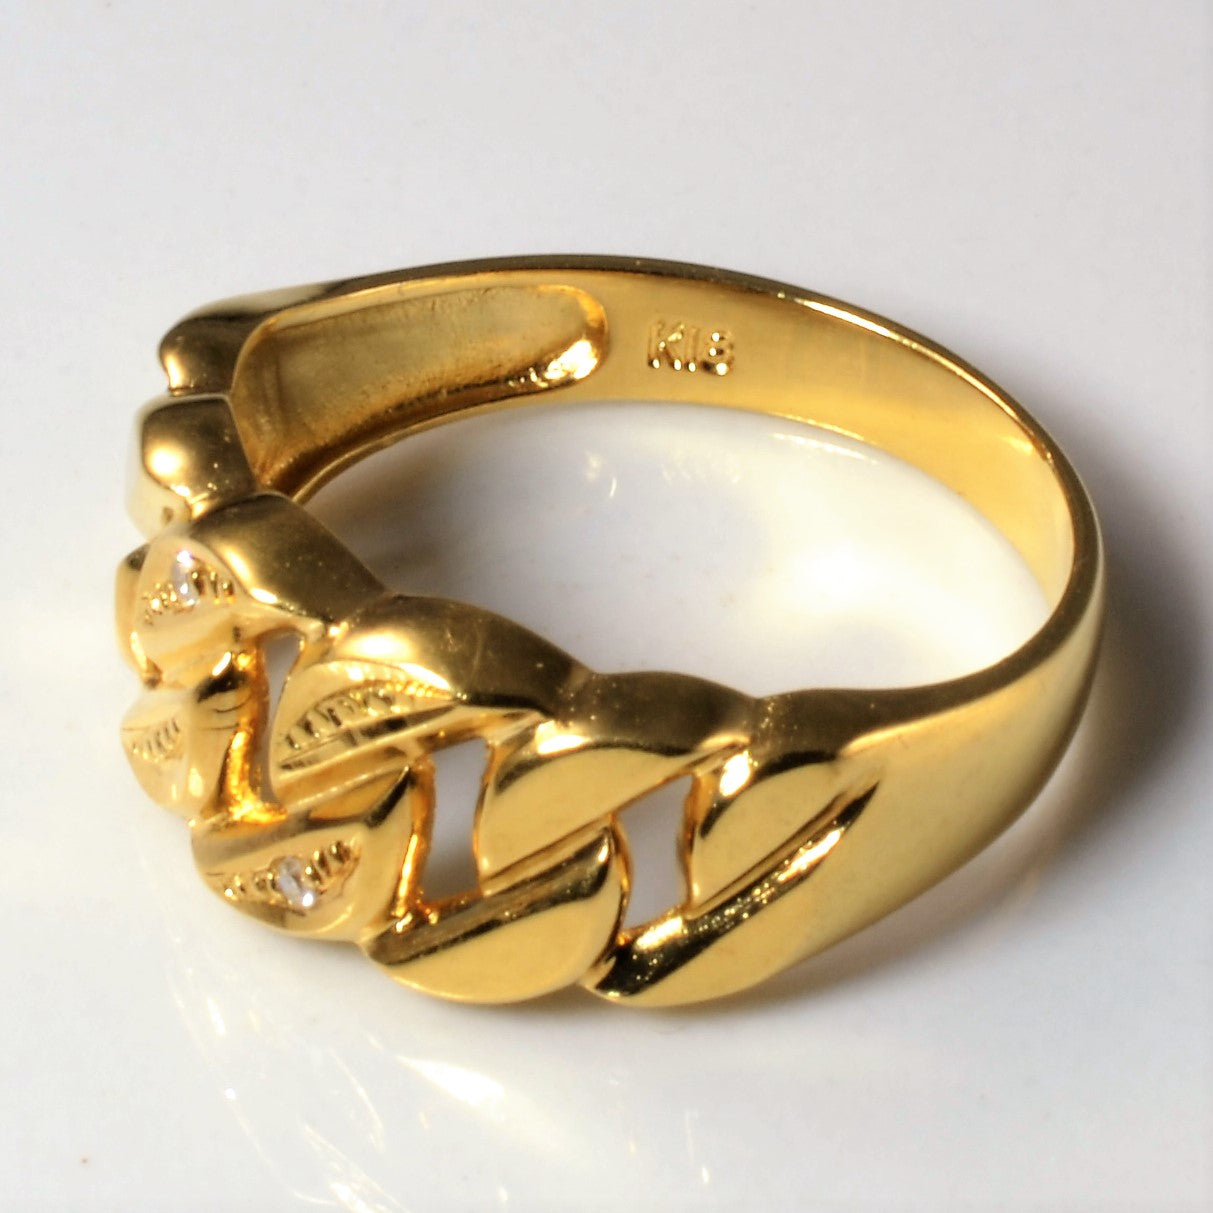 Textured Curb Link Style Ring | 0.01ctw | SZ 6.25 |